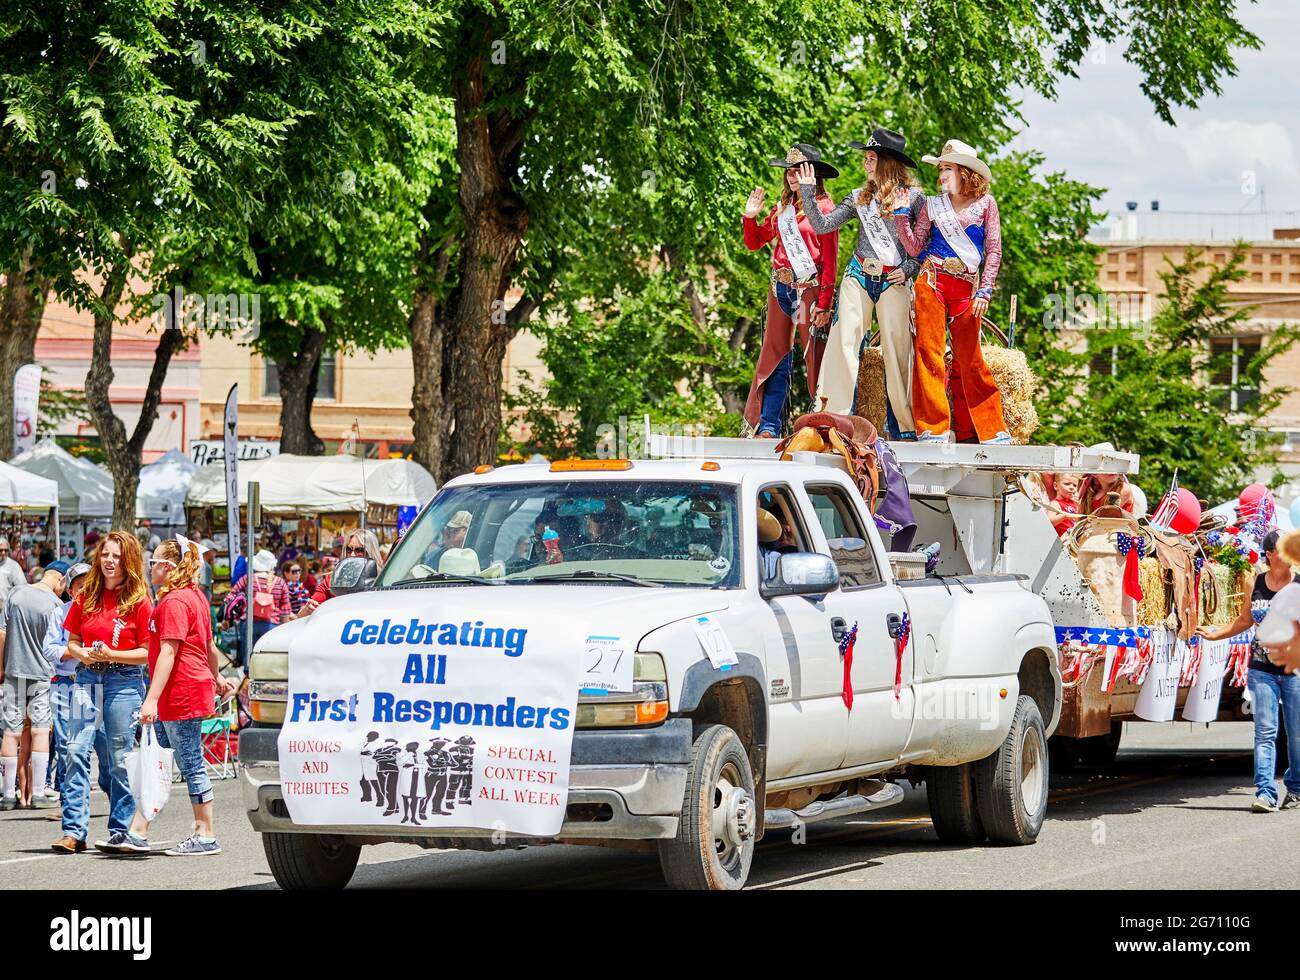 Prescott, Arizona, USA - July 3, 2021: Particpants riding on and float and waving to the spectators in the 4th of July parade Stock Photo